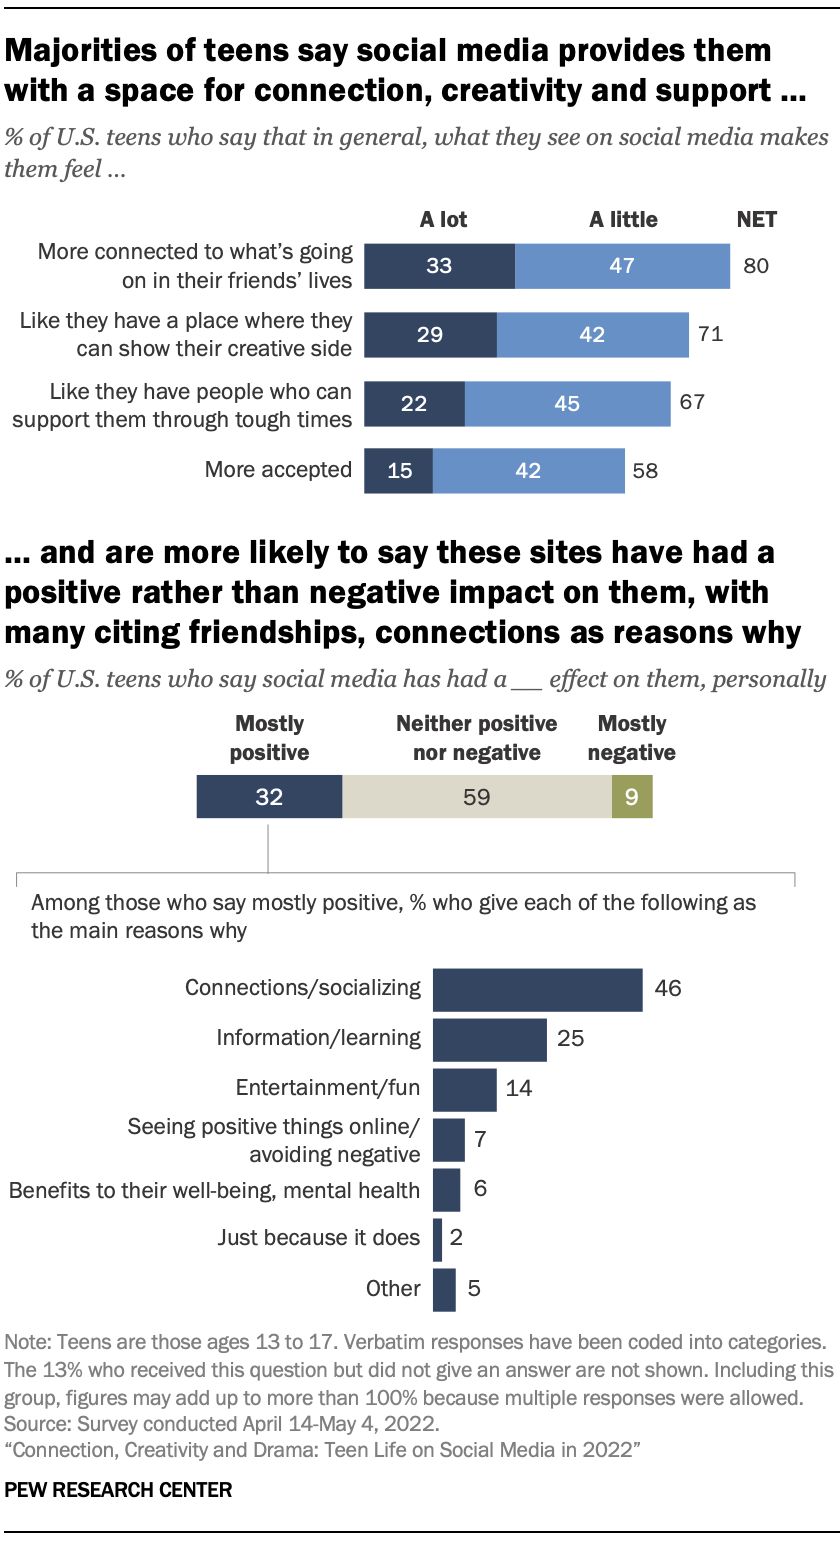 Majorities of teens say social media provides them with a space for connection, creativity and support …